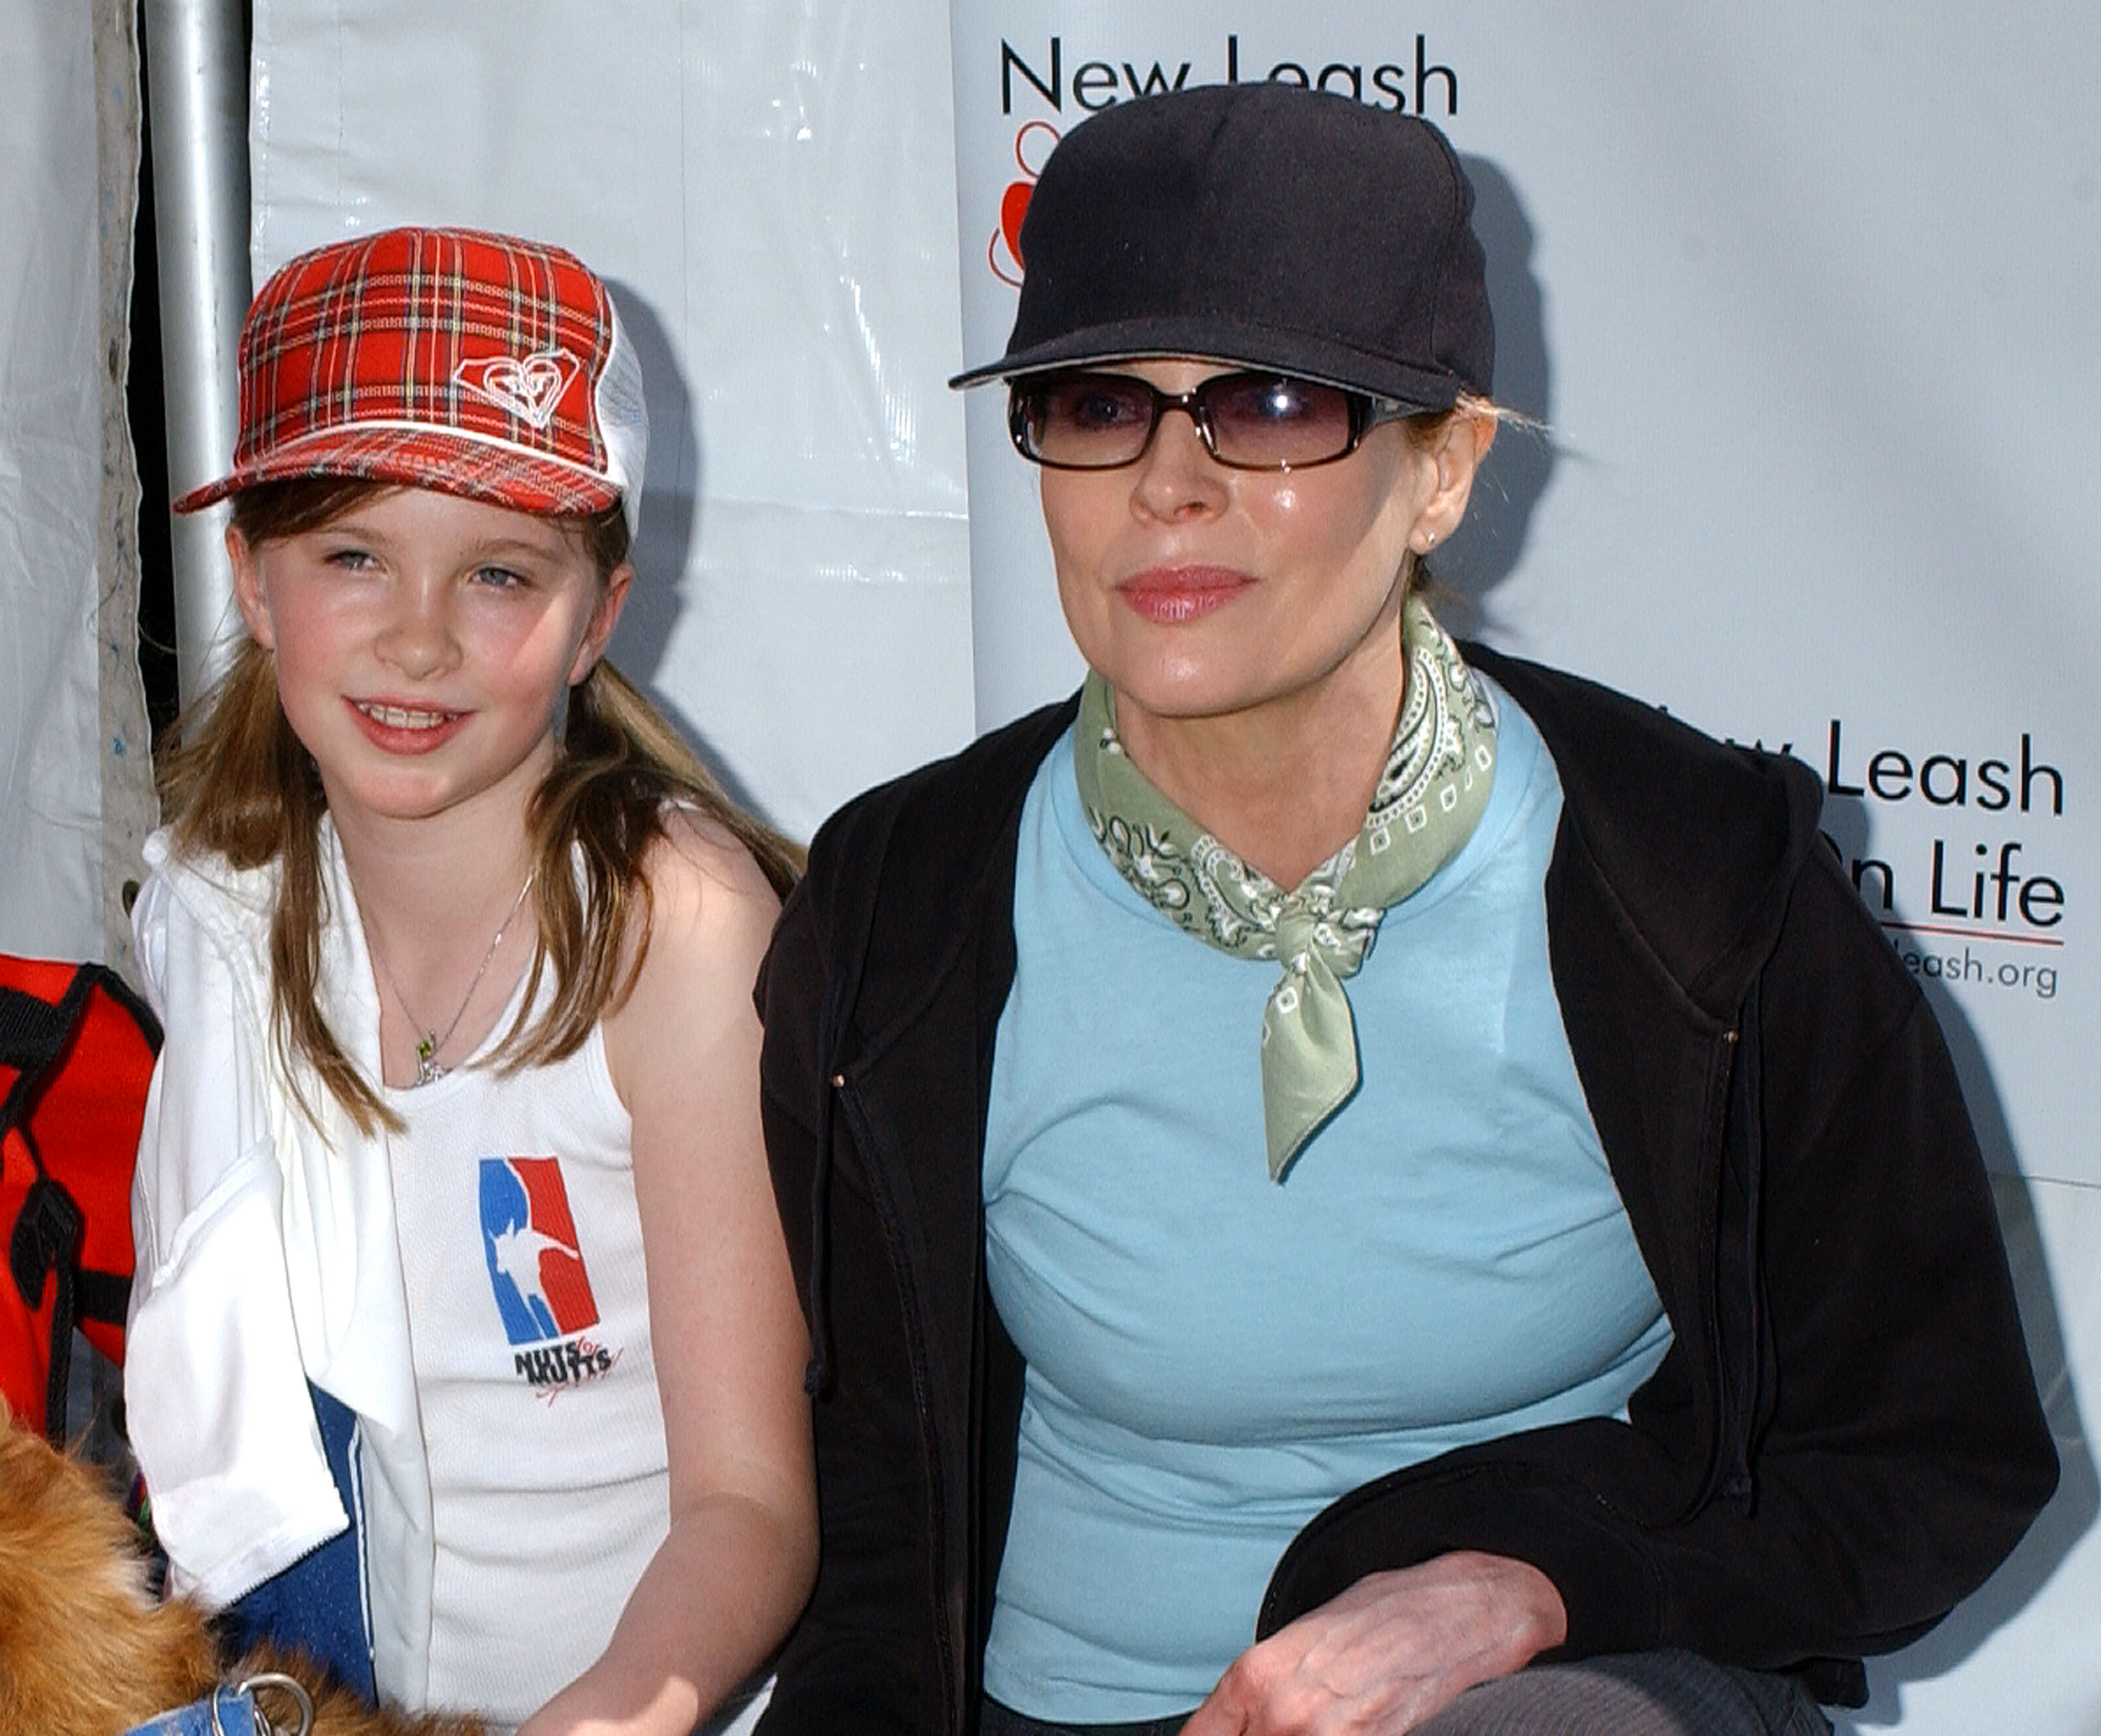 Kim Basinger and Ireland Baldwin photographed during the Nuts for Mutts celebrity-judged dog show at Pierce College on April 3, 2005 in Woodland Hills, California | Source: Getty Images